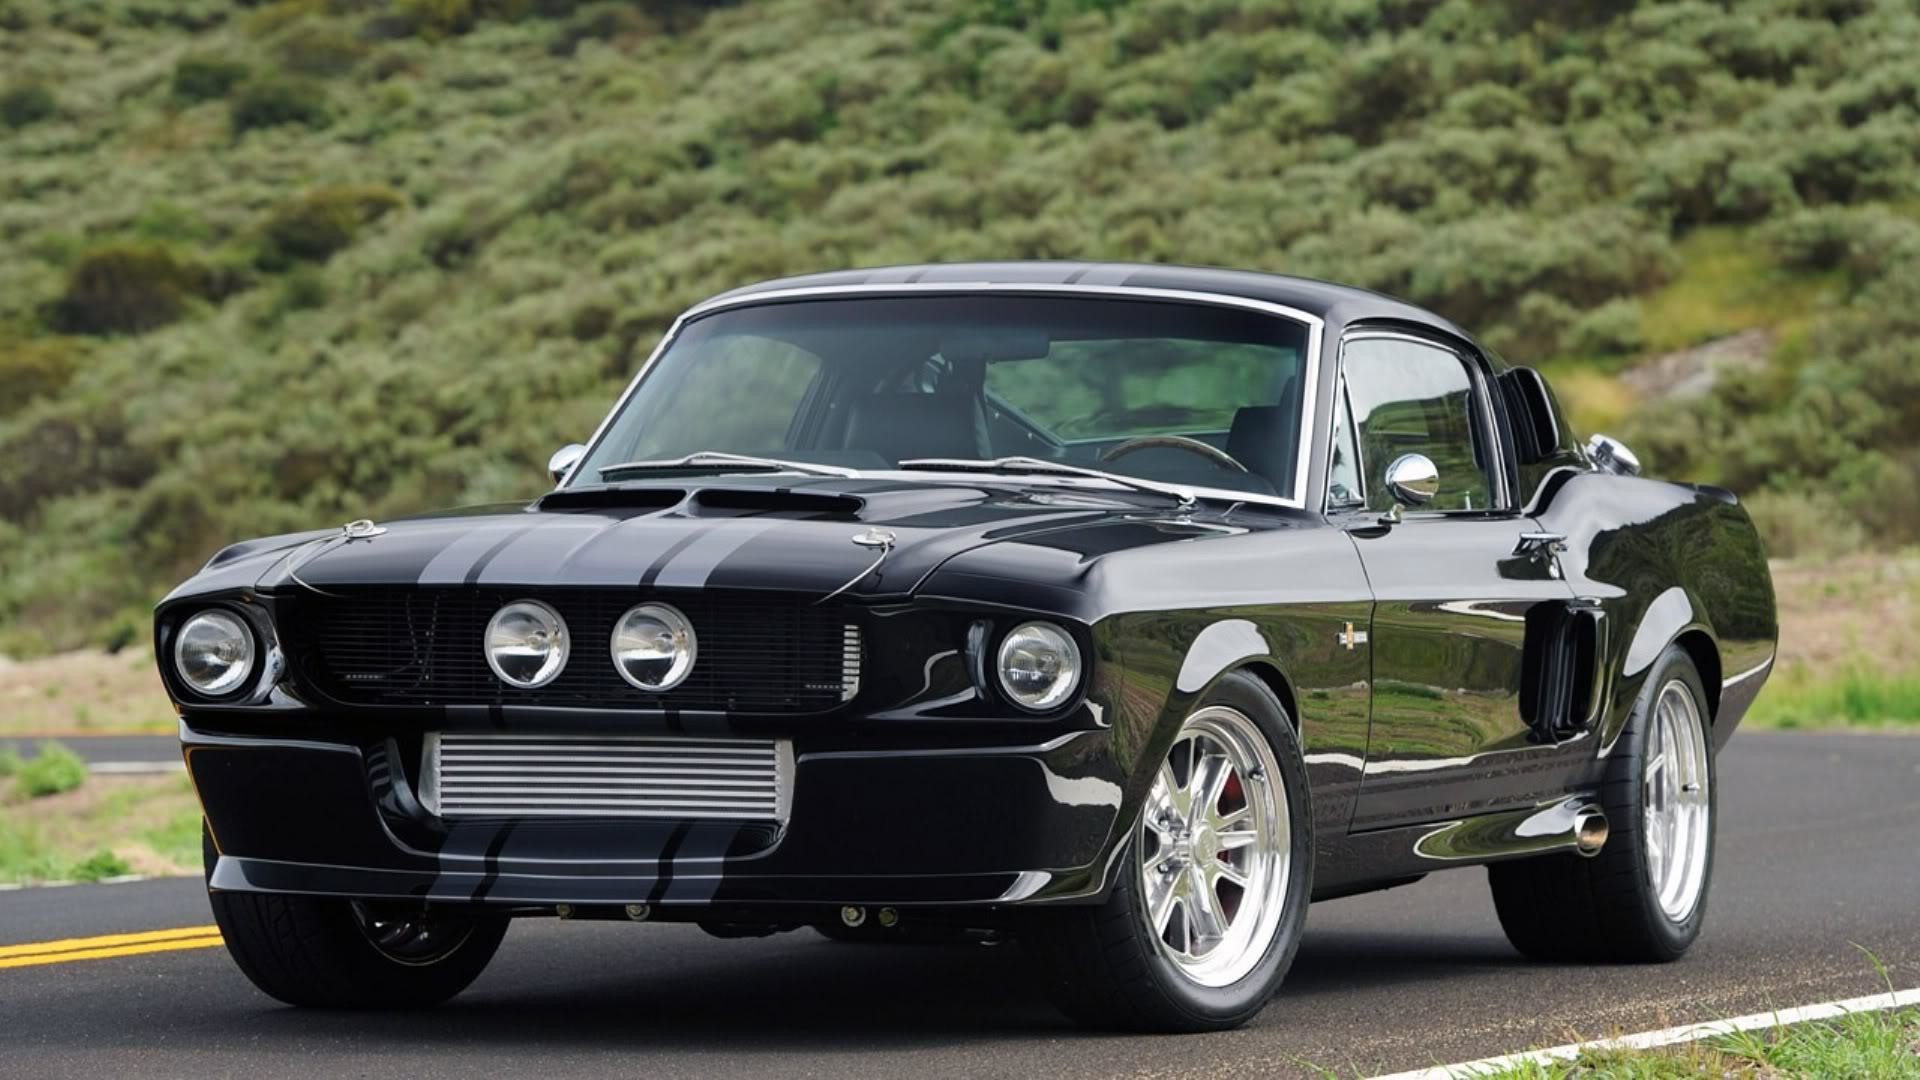 1920x1080 1967 Ford Mustang Shelby GT500 Background